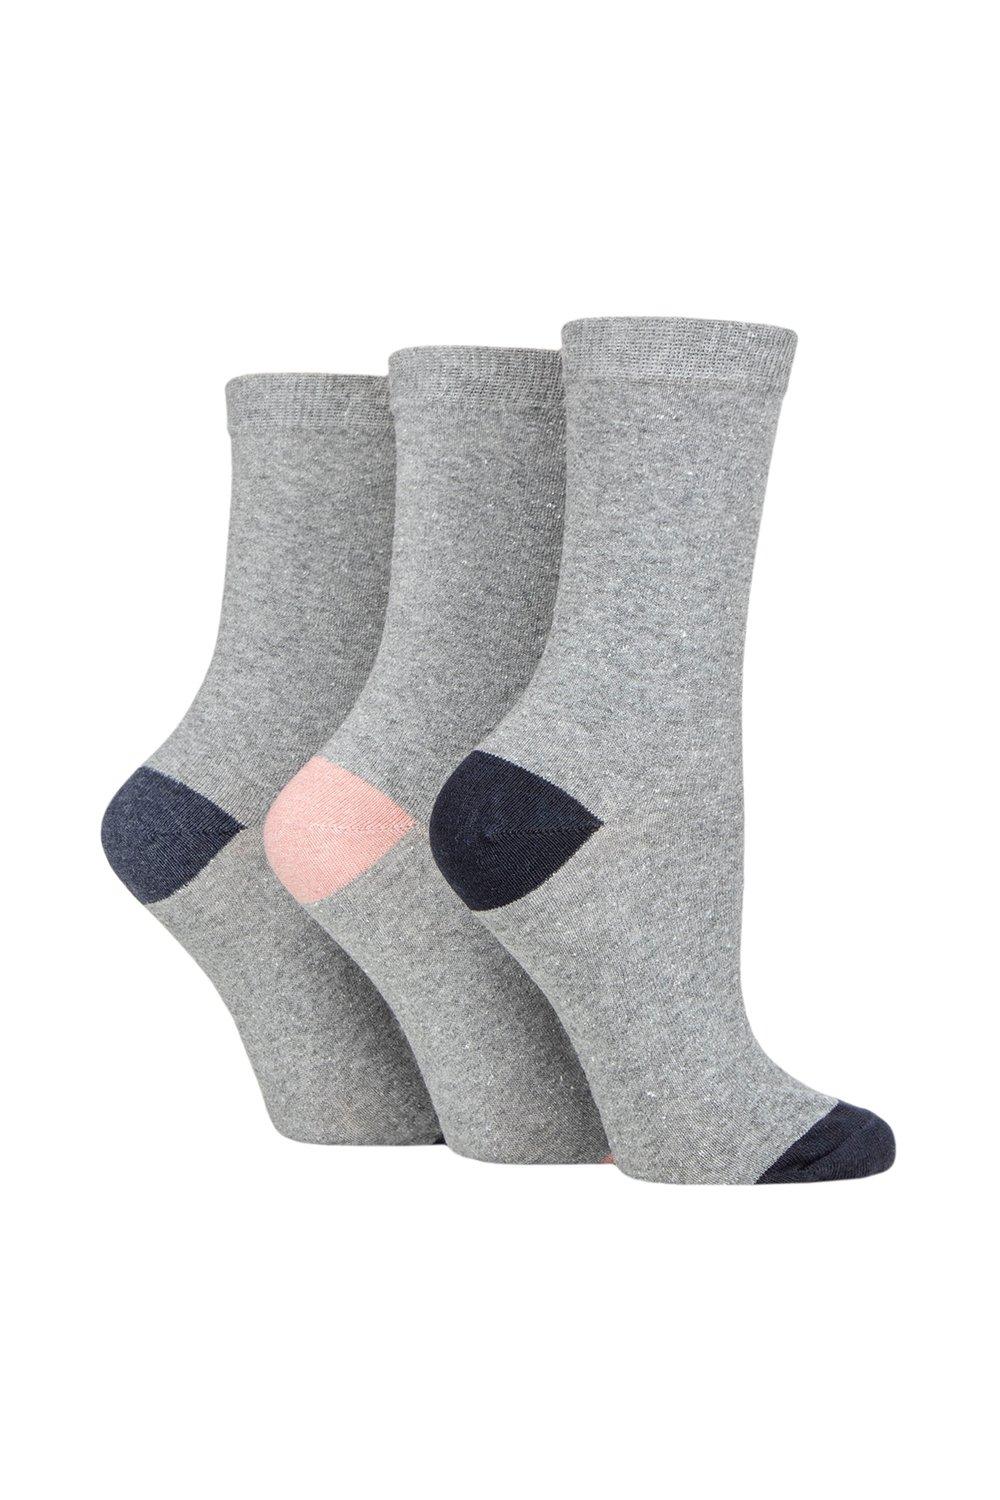 3 Pair 100% Recycled Heel and Toe Cotton Socks